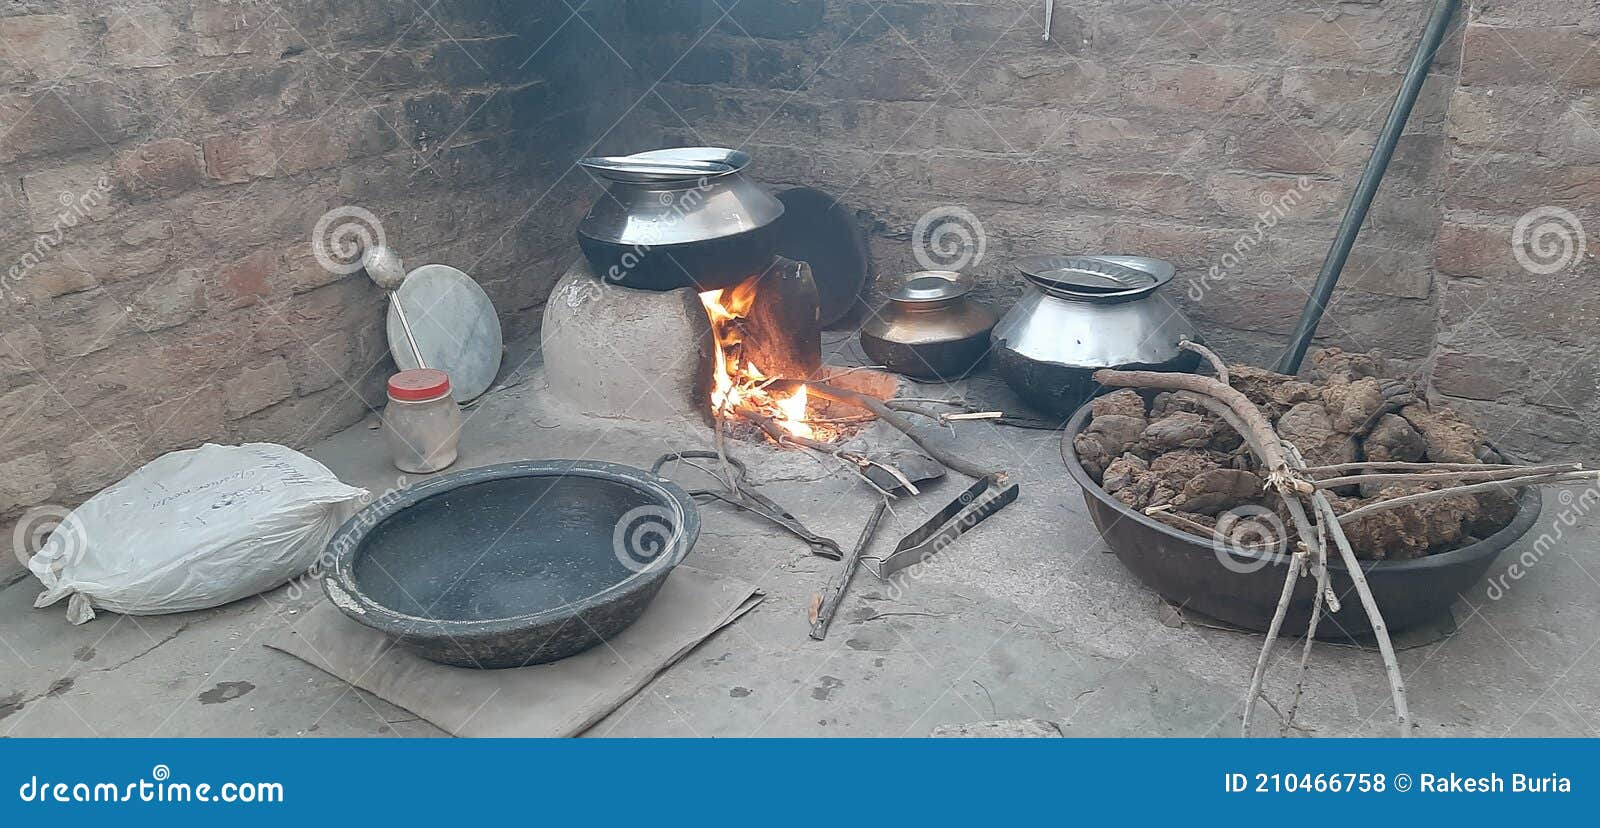 stove fours (chulha) of rural surroundings.